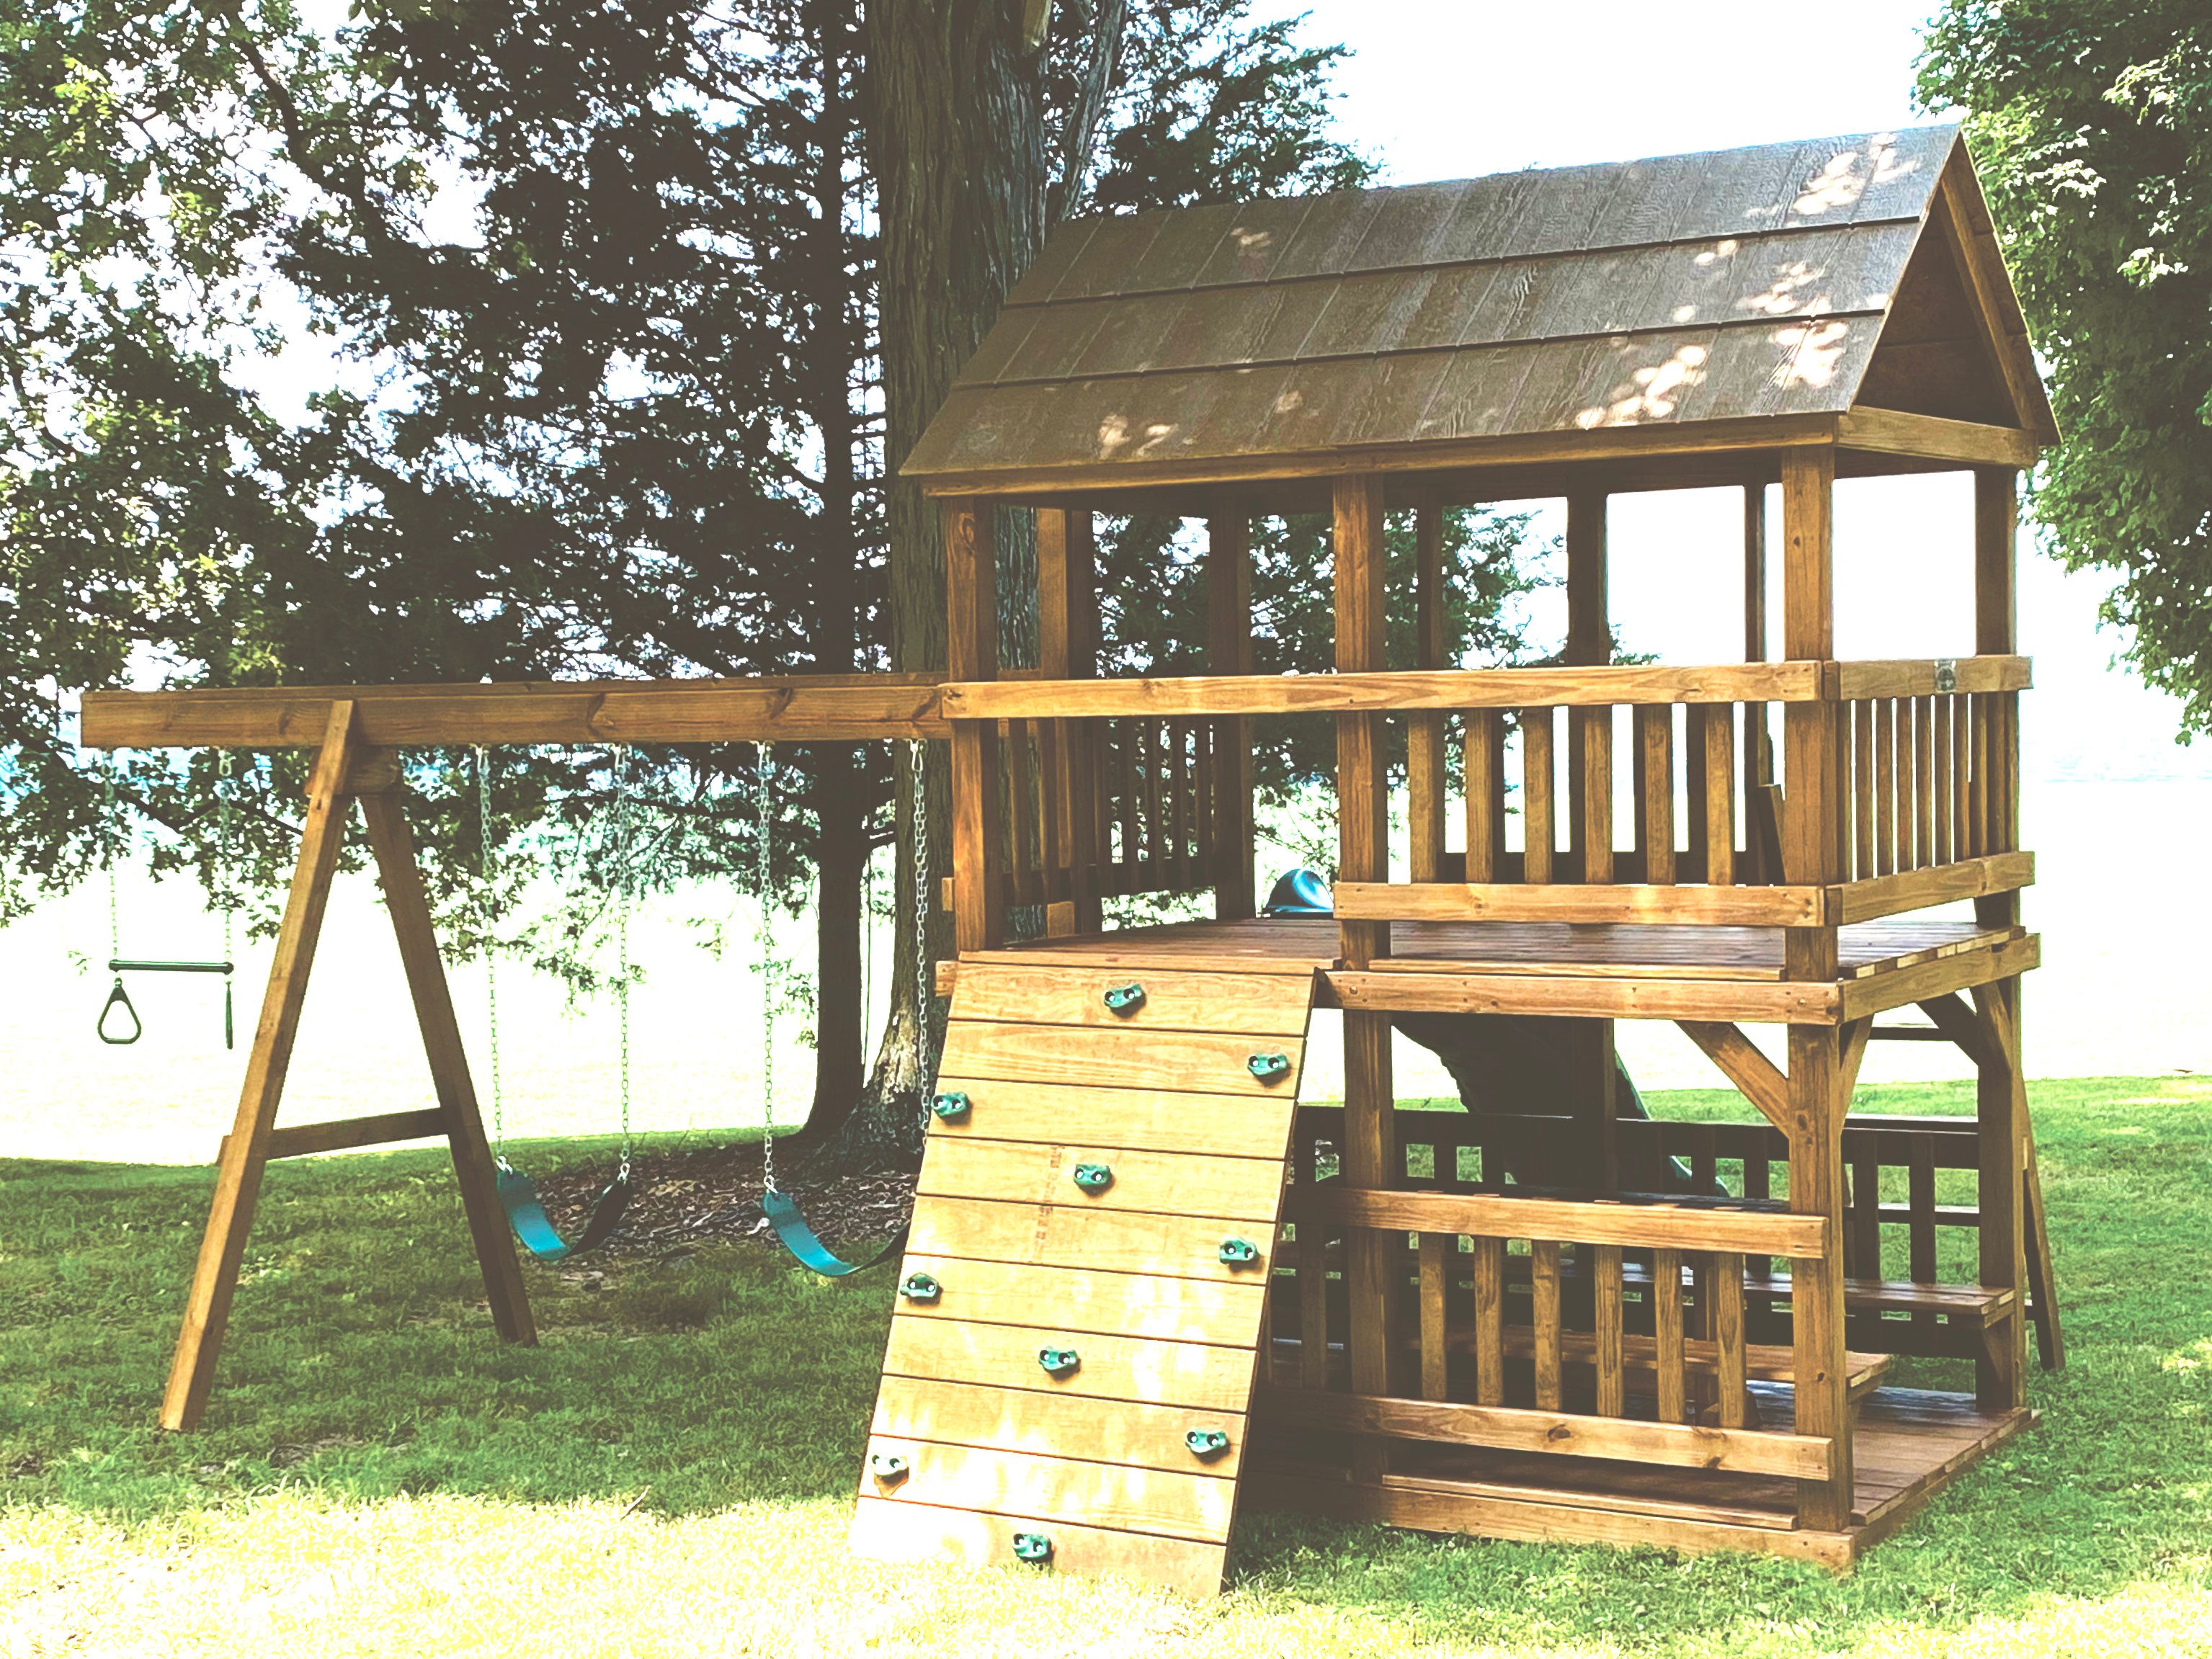 model 1700 playset. 5x7 fully covered tower, rock wall, picnic table, 3position attachment with 2 swings and a trapeze bar